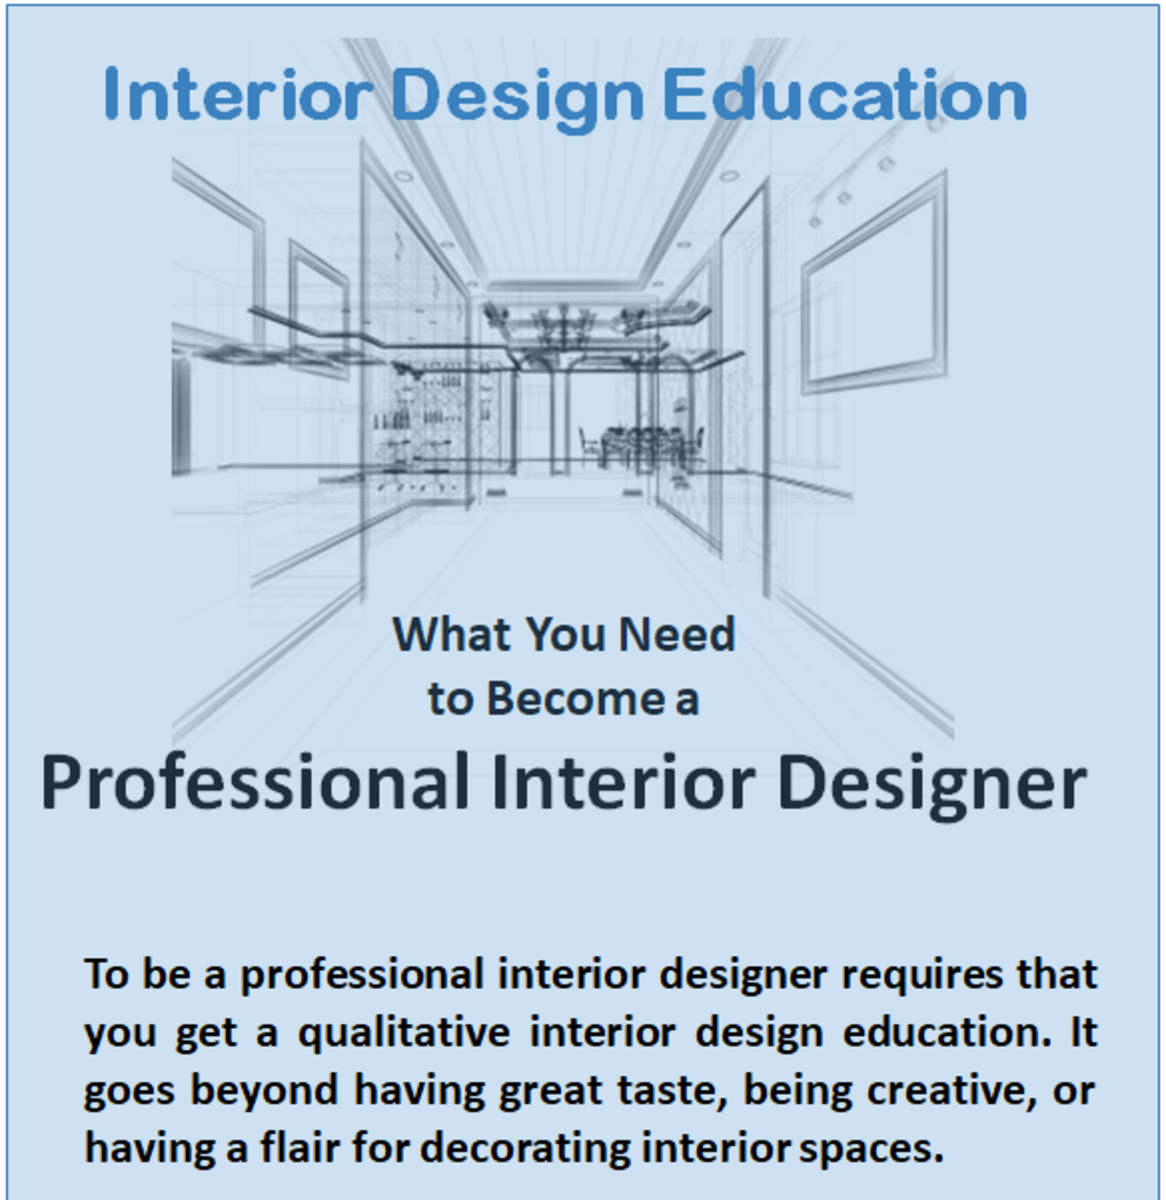 What Qualifications Do You Need To Be An Interior Designer In Australia